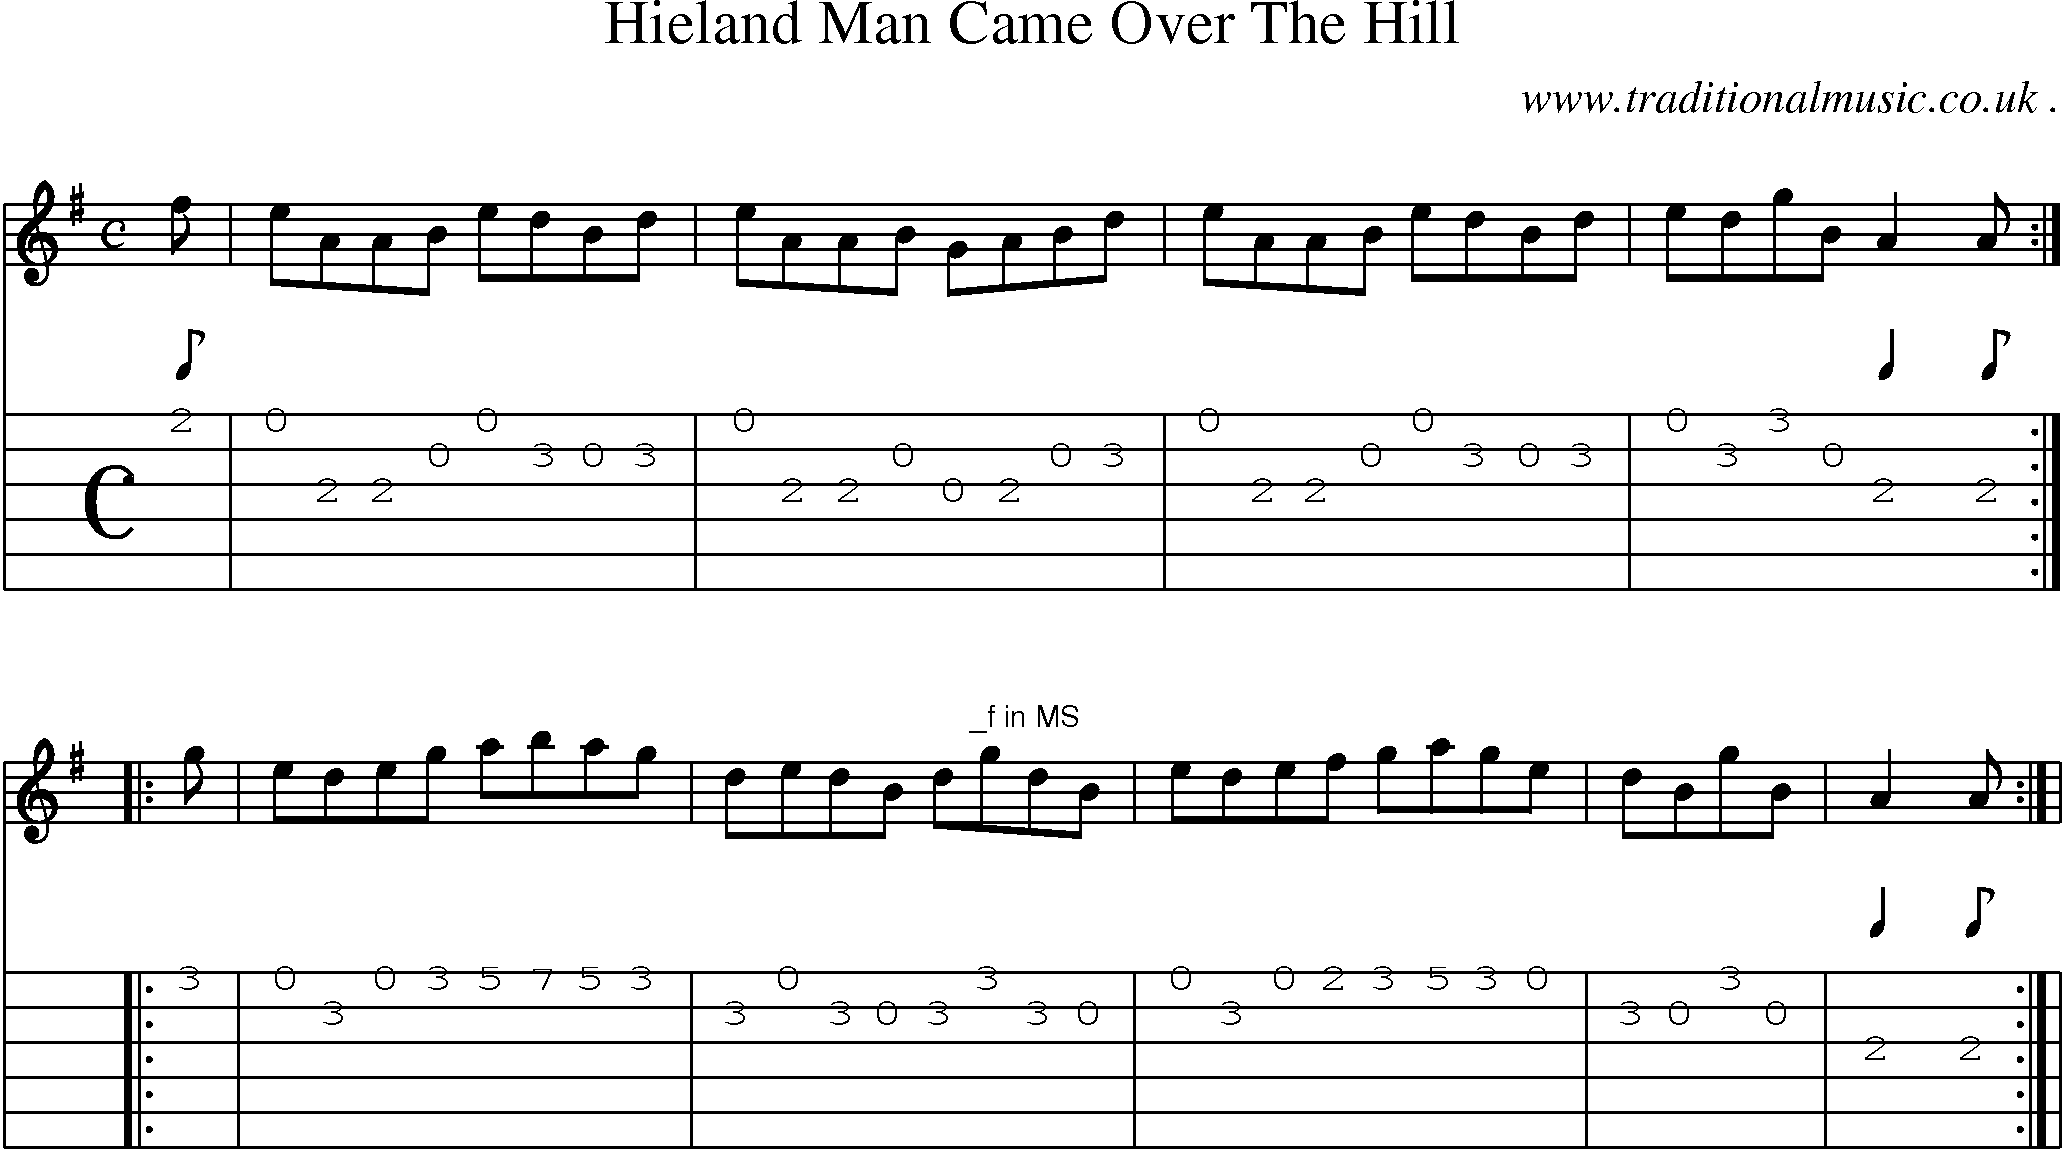 Sheet-Music and Guitar Tabs for Hieland Man Came Over The Hill